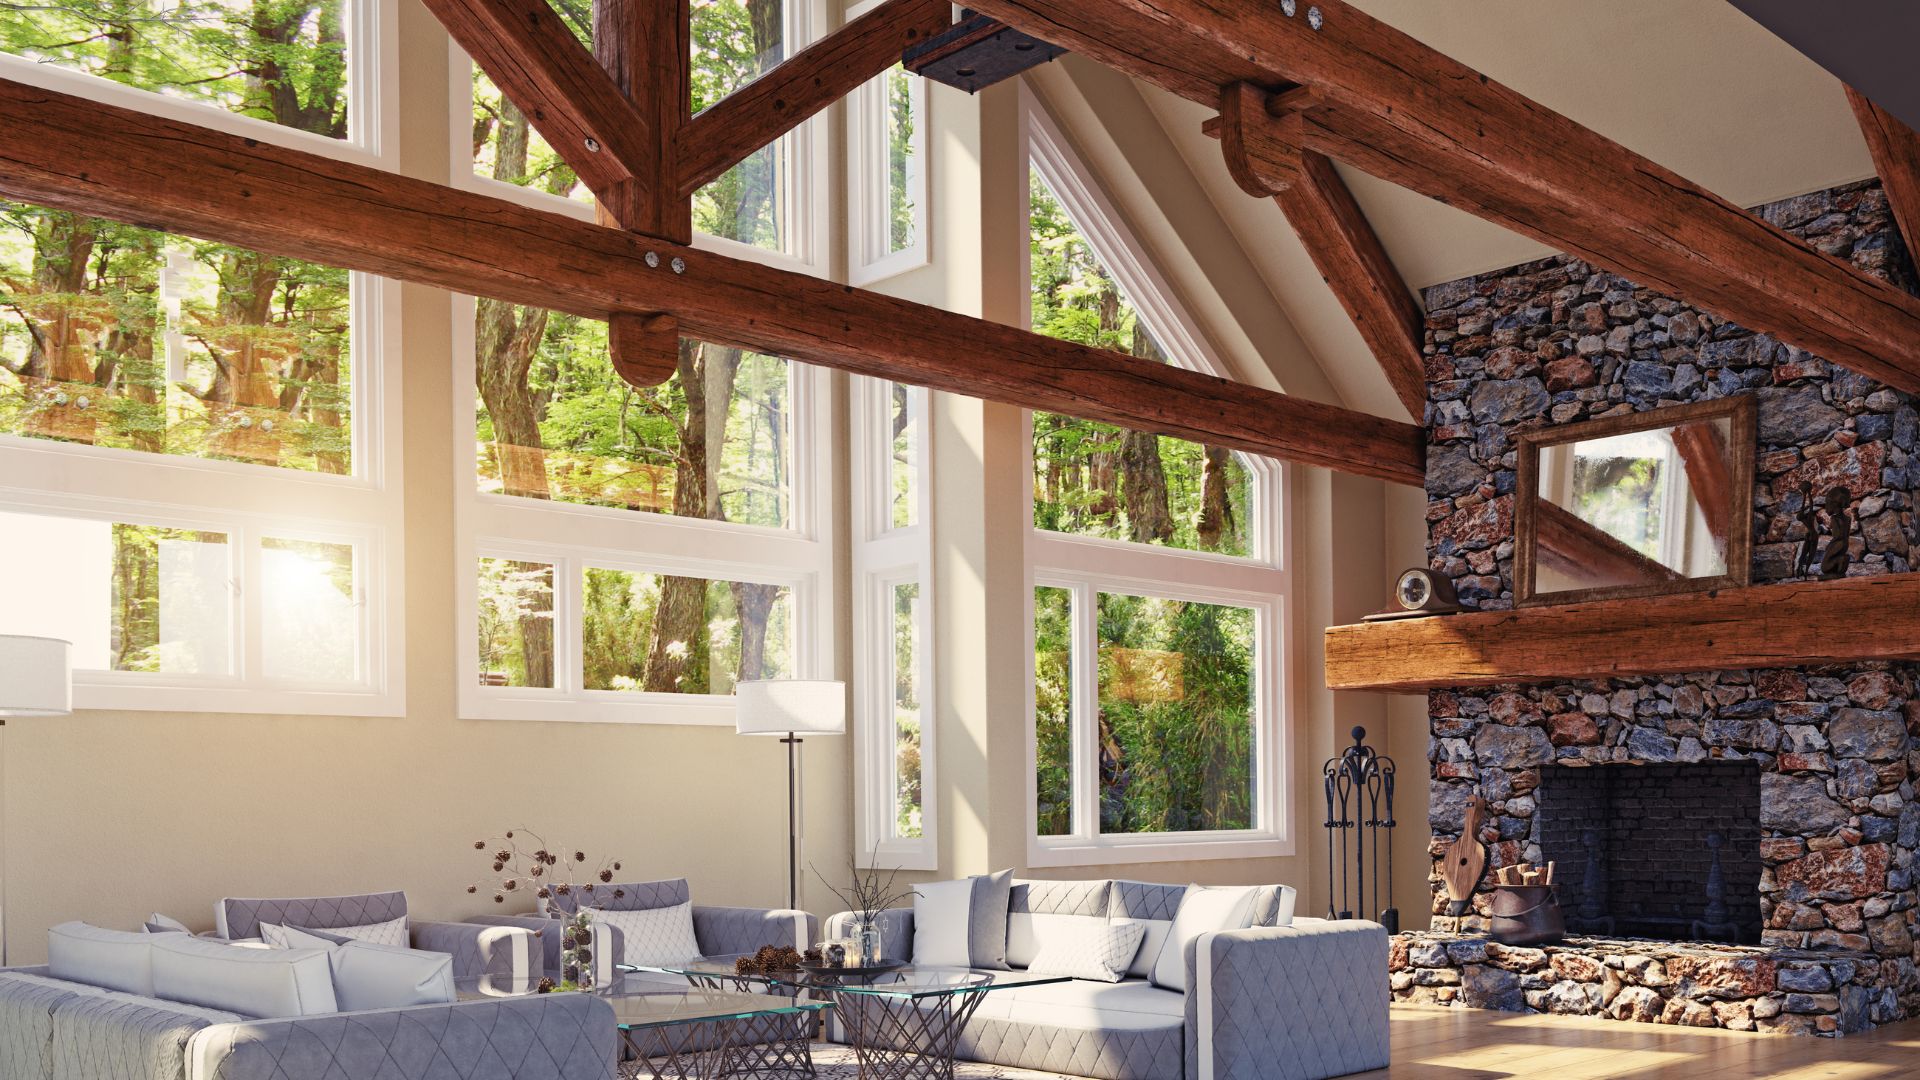 Modern or Traditional: Beams For Every Style